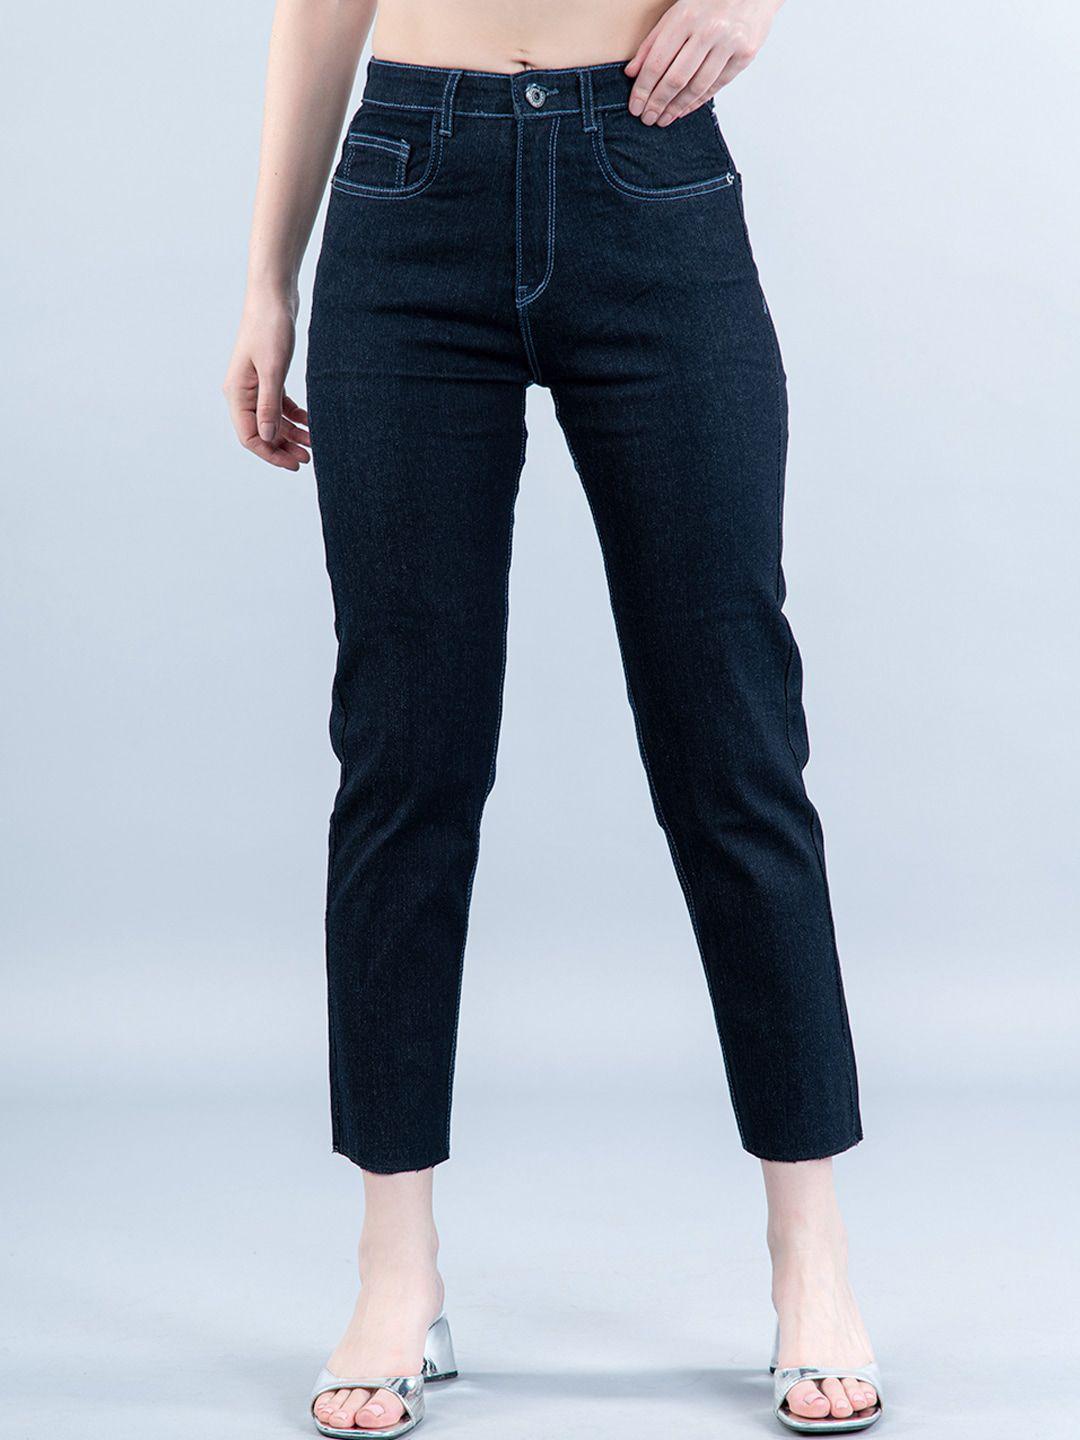 tistabene-women-comfort-mid-rise-stretchable-clean-look-jeans